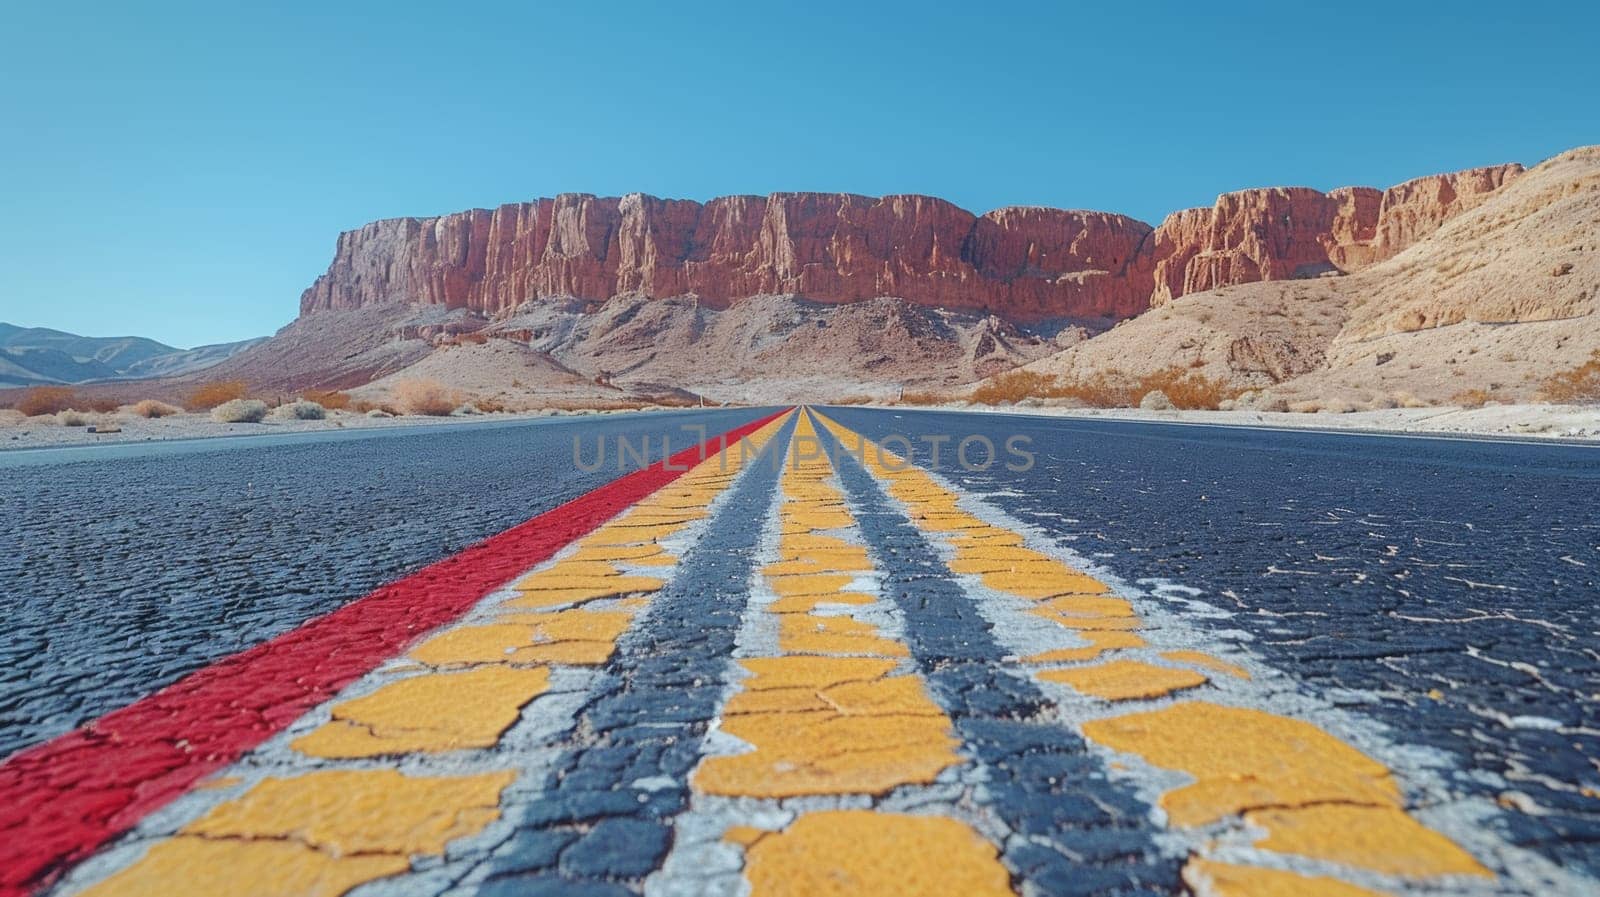 A road with a yellow stripe and red line in the middle, AI by starush